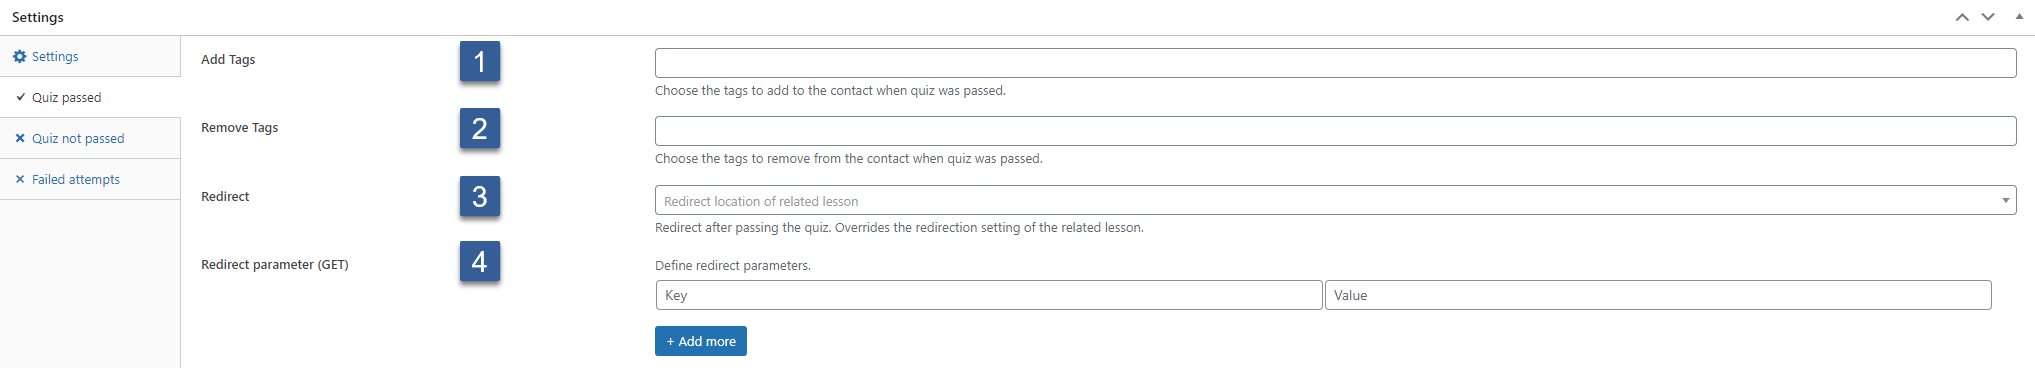 How to create a quiz - Quiz passed settings